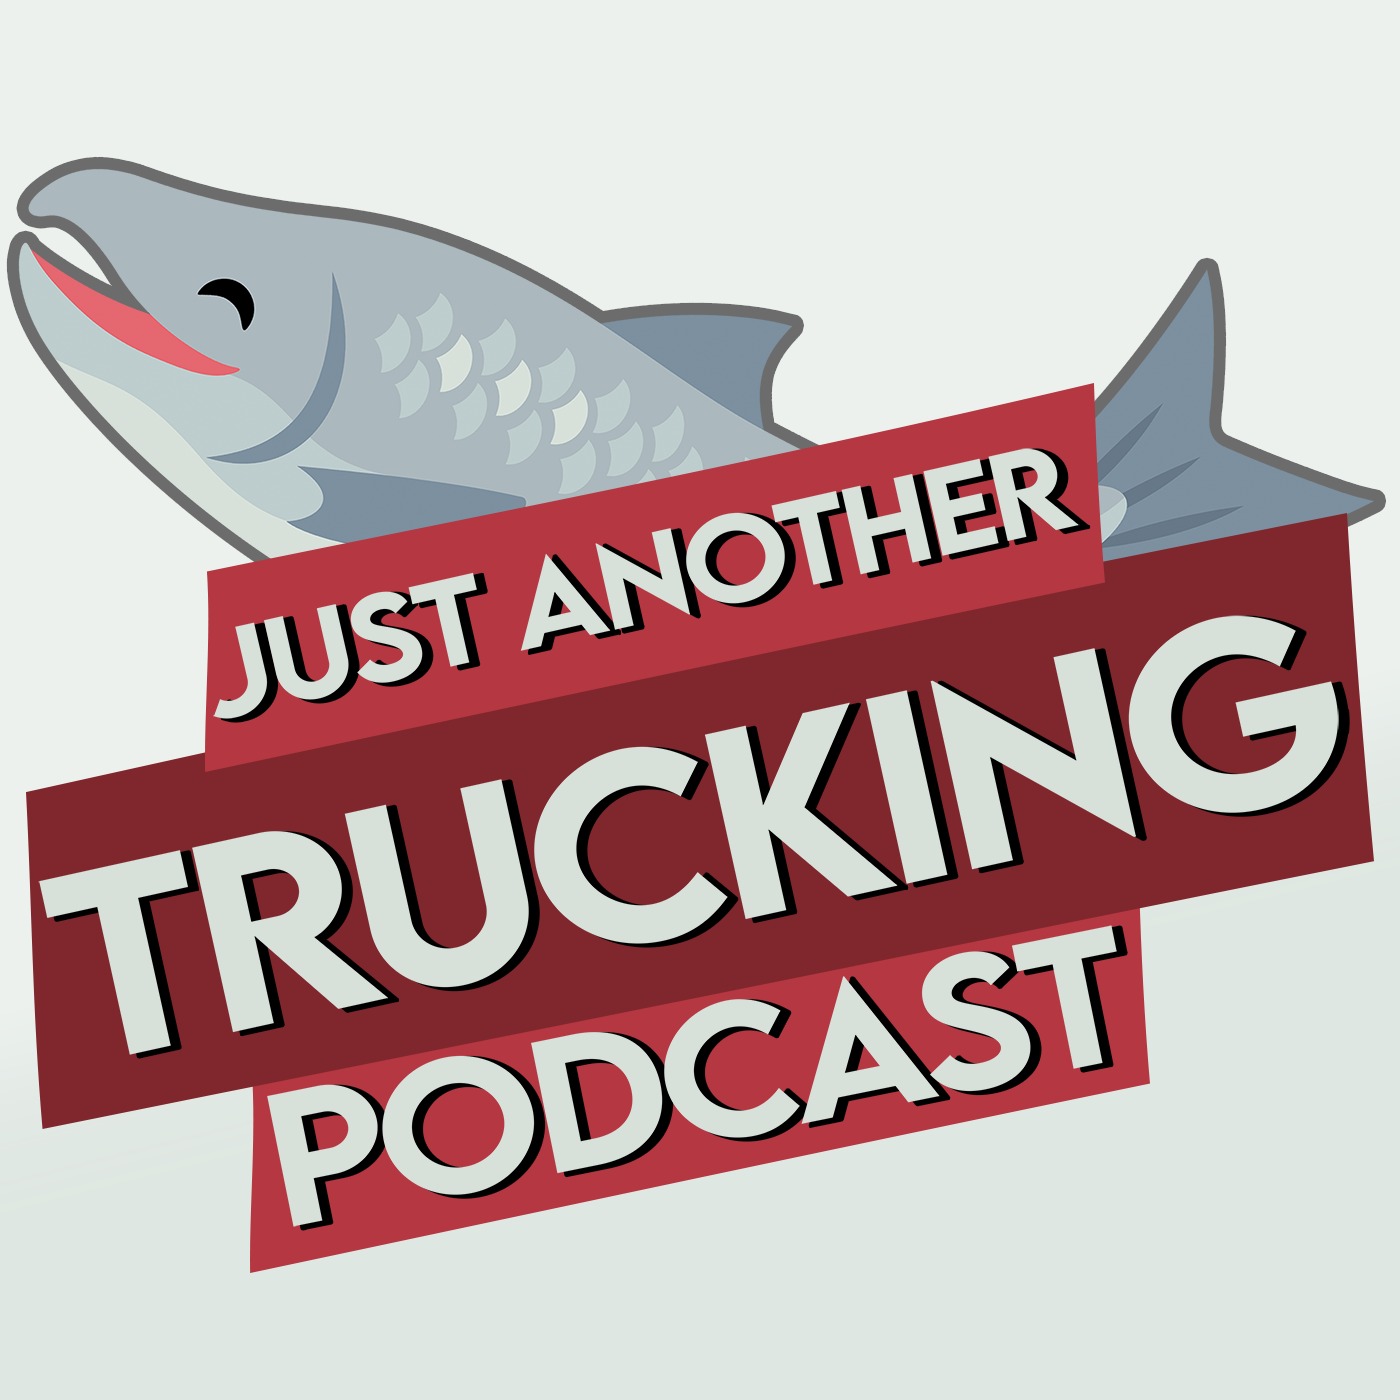 WTF is a rotisserie?!? - Just another trucking podcast